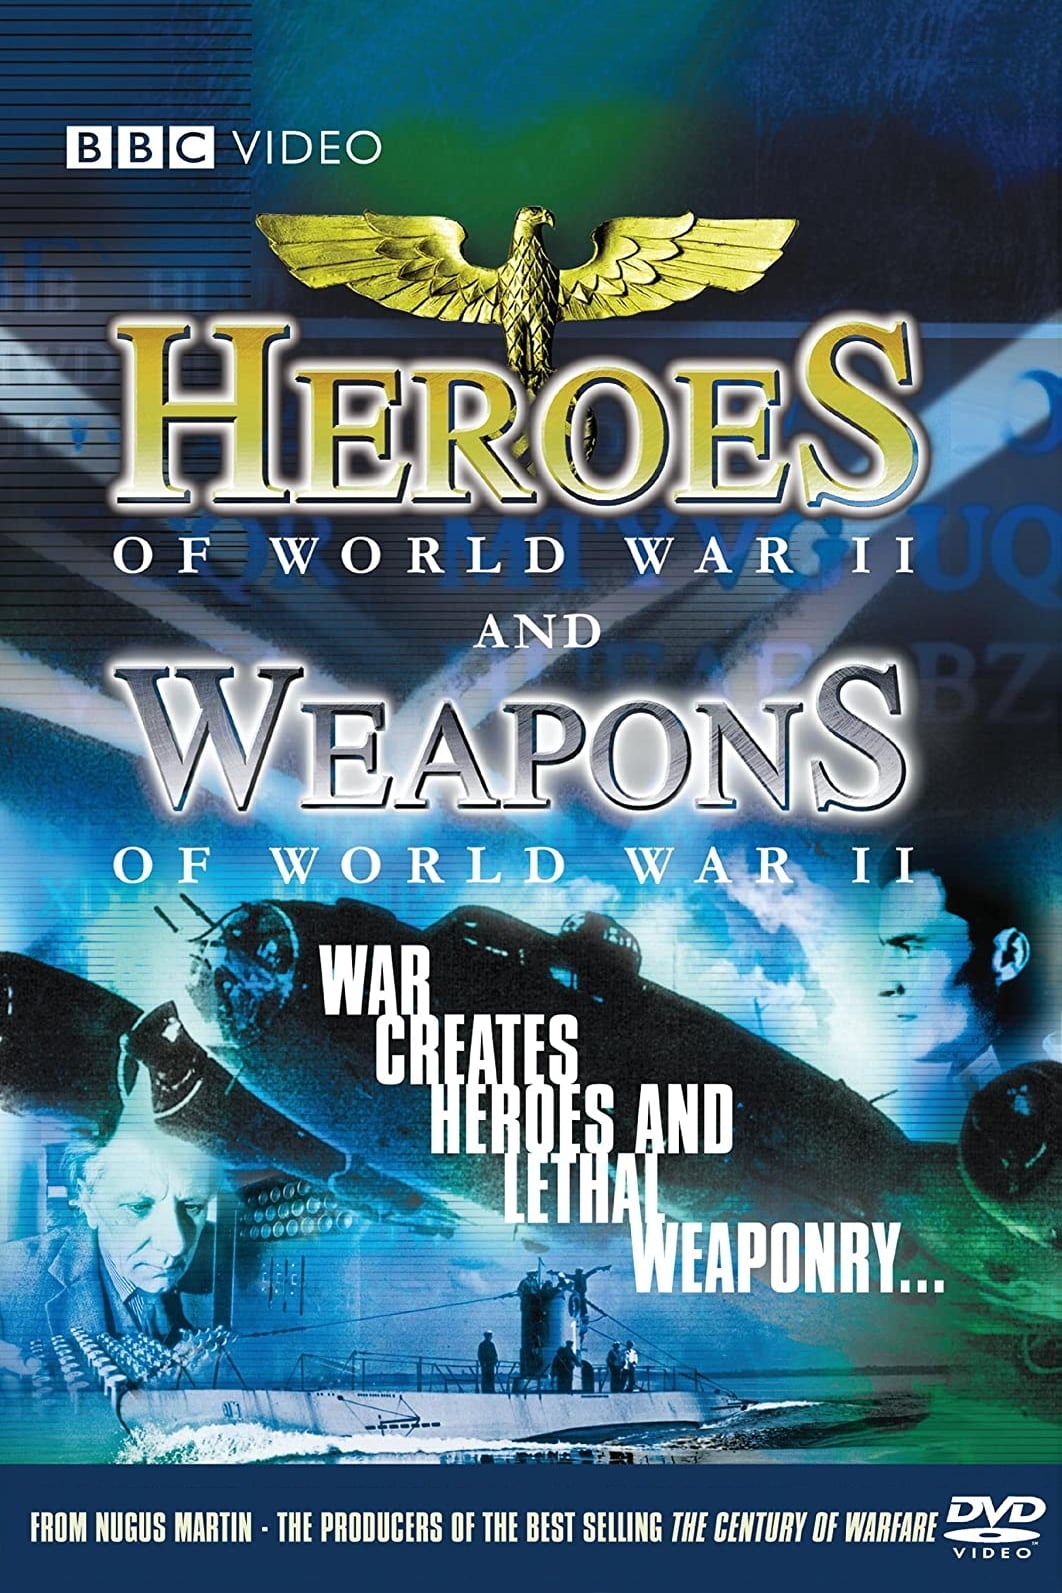 BBC - Heroes and Weapons of WWII